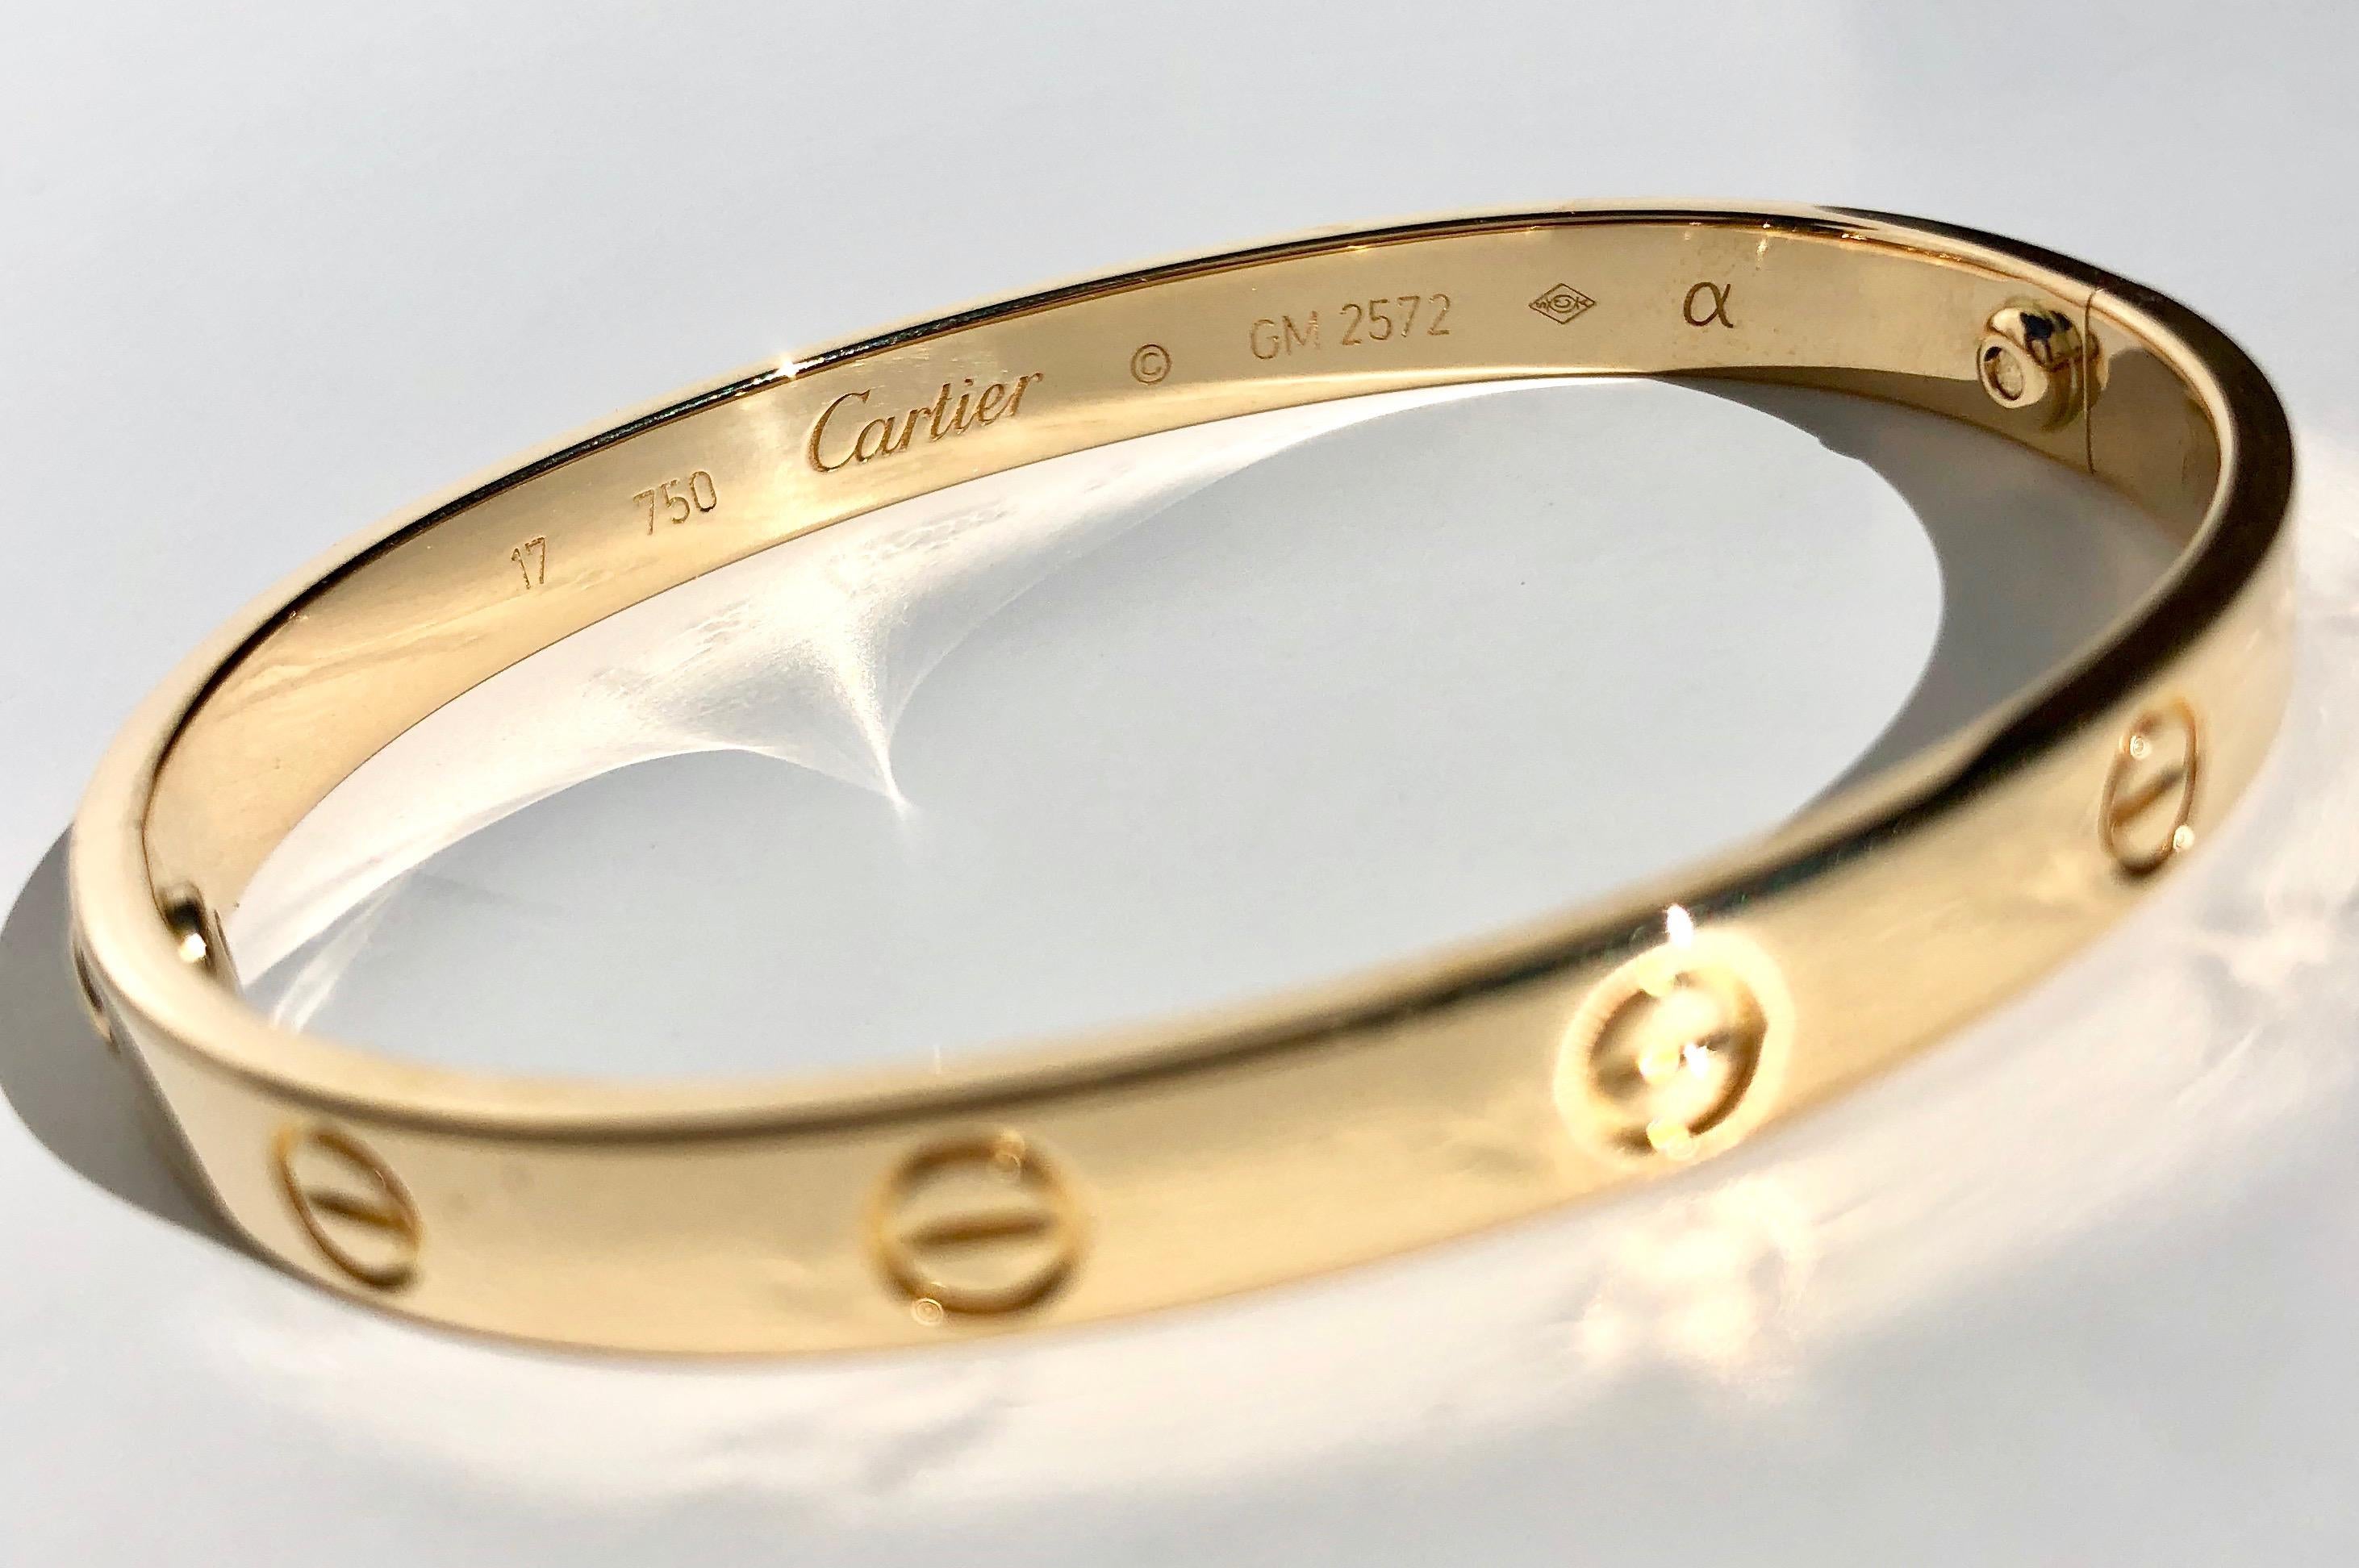 Cartier 18k Yellow Gold Love Bracelet, with Box/Papers 7